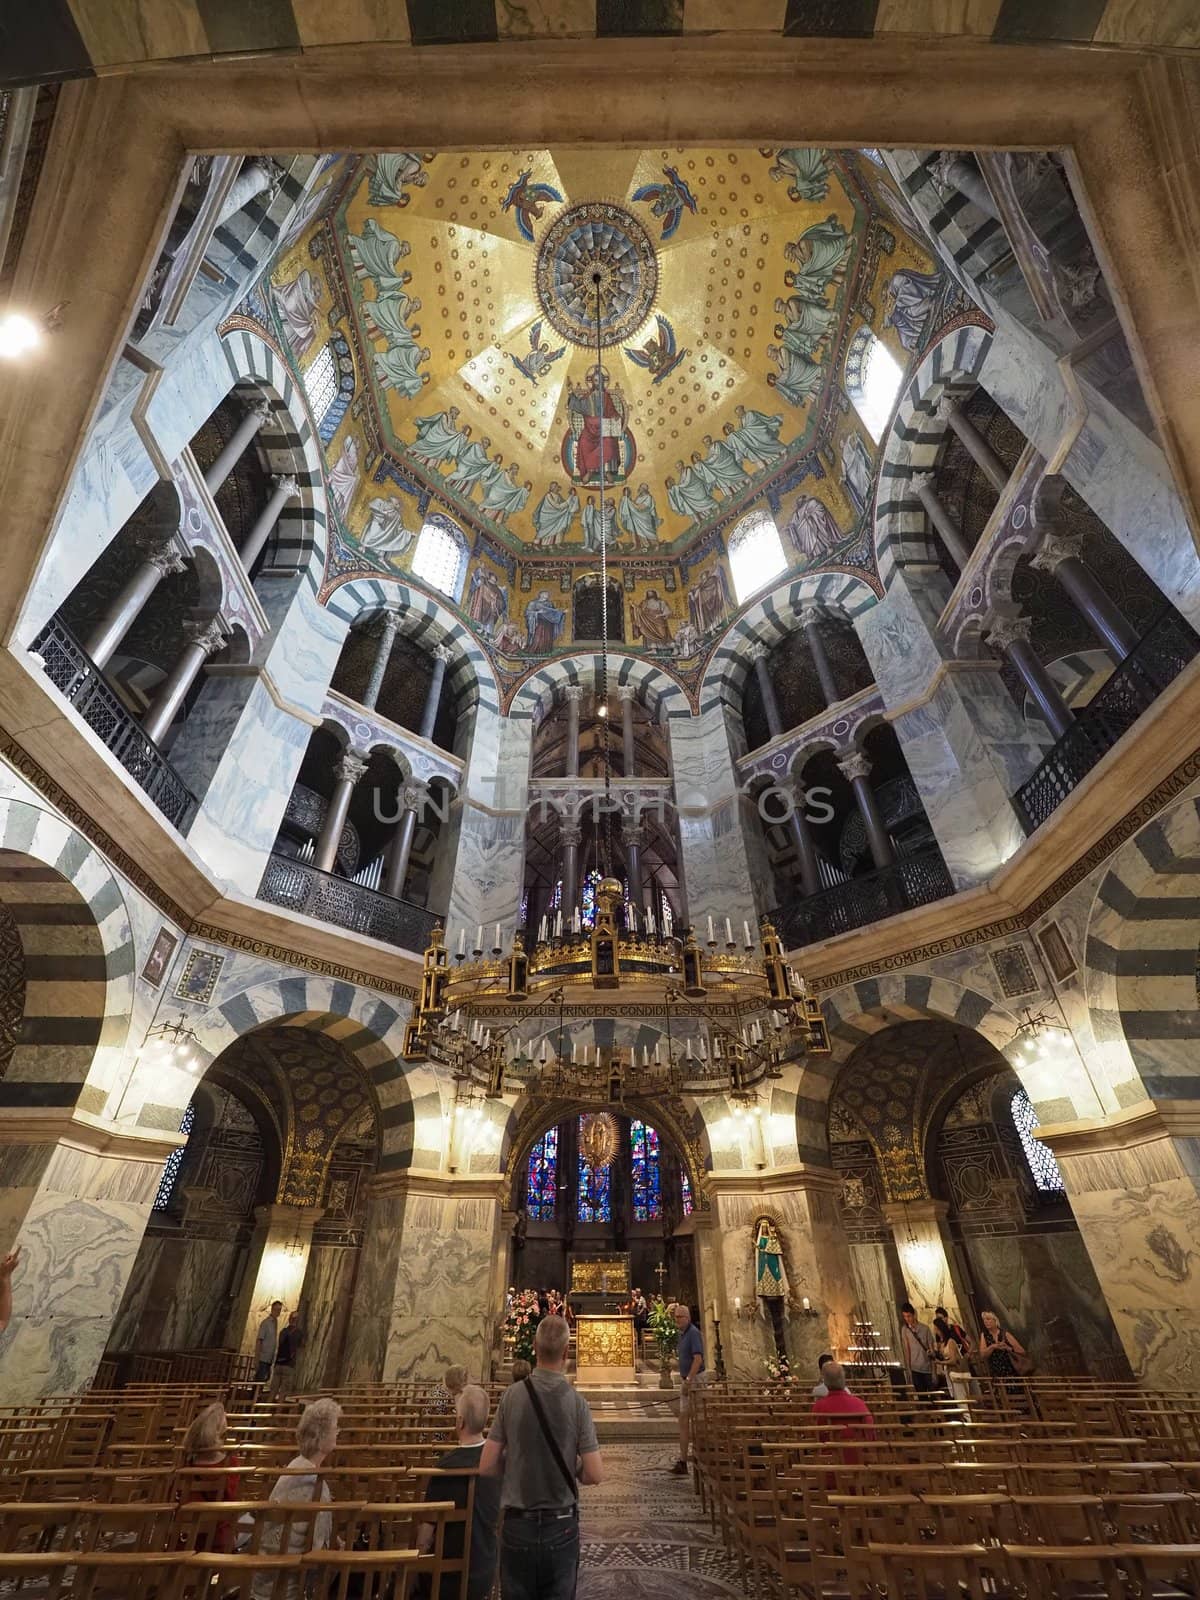 AACHEN, GERMANY - CIRCA AUGUST 2019: Charlemagne Palatine Chapel at Aachener Dom cathedral church